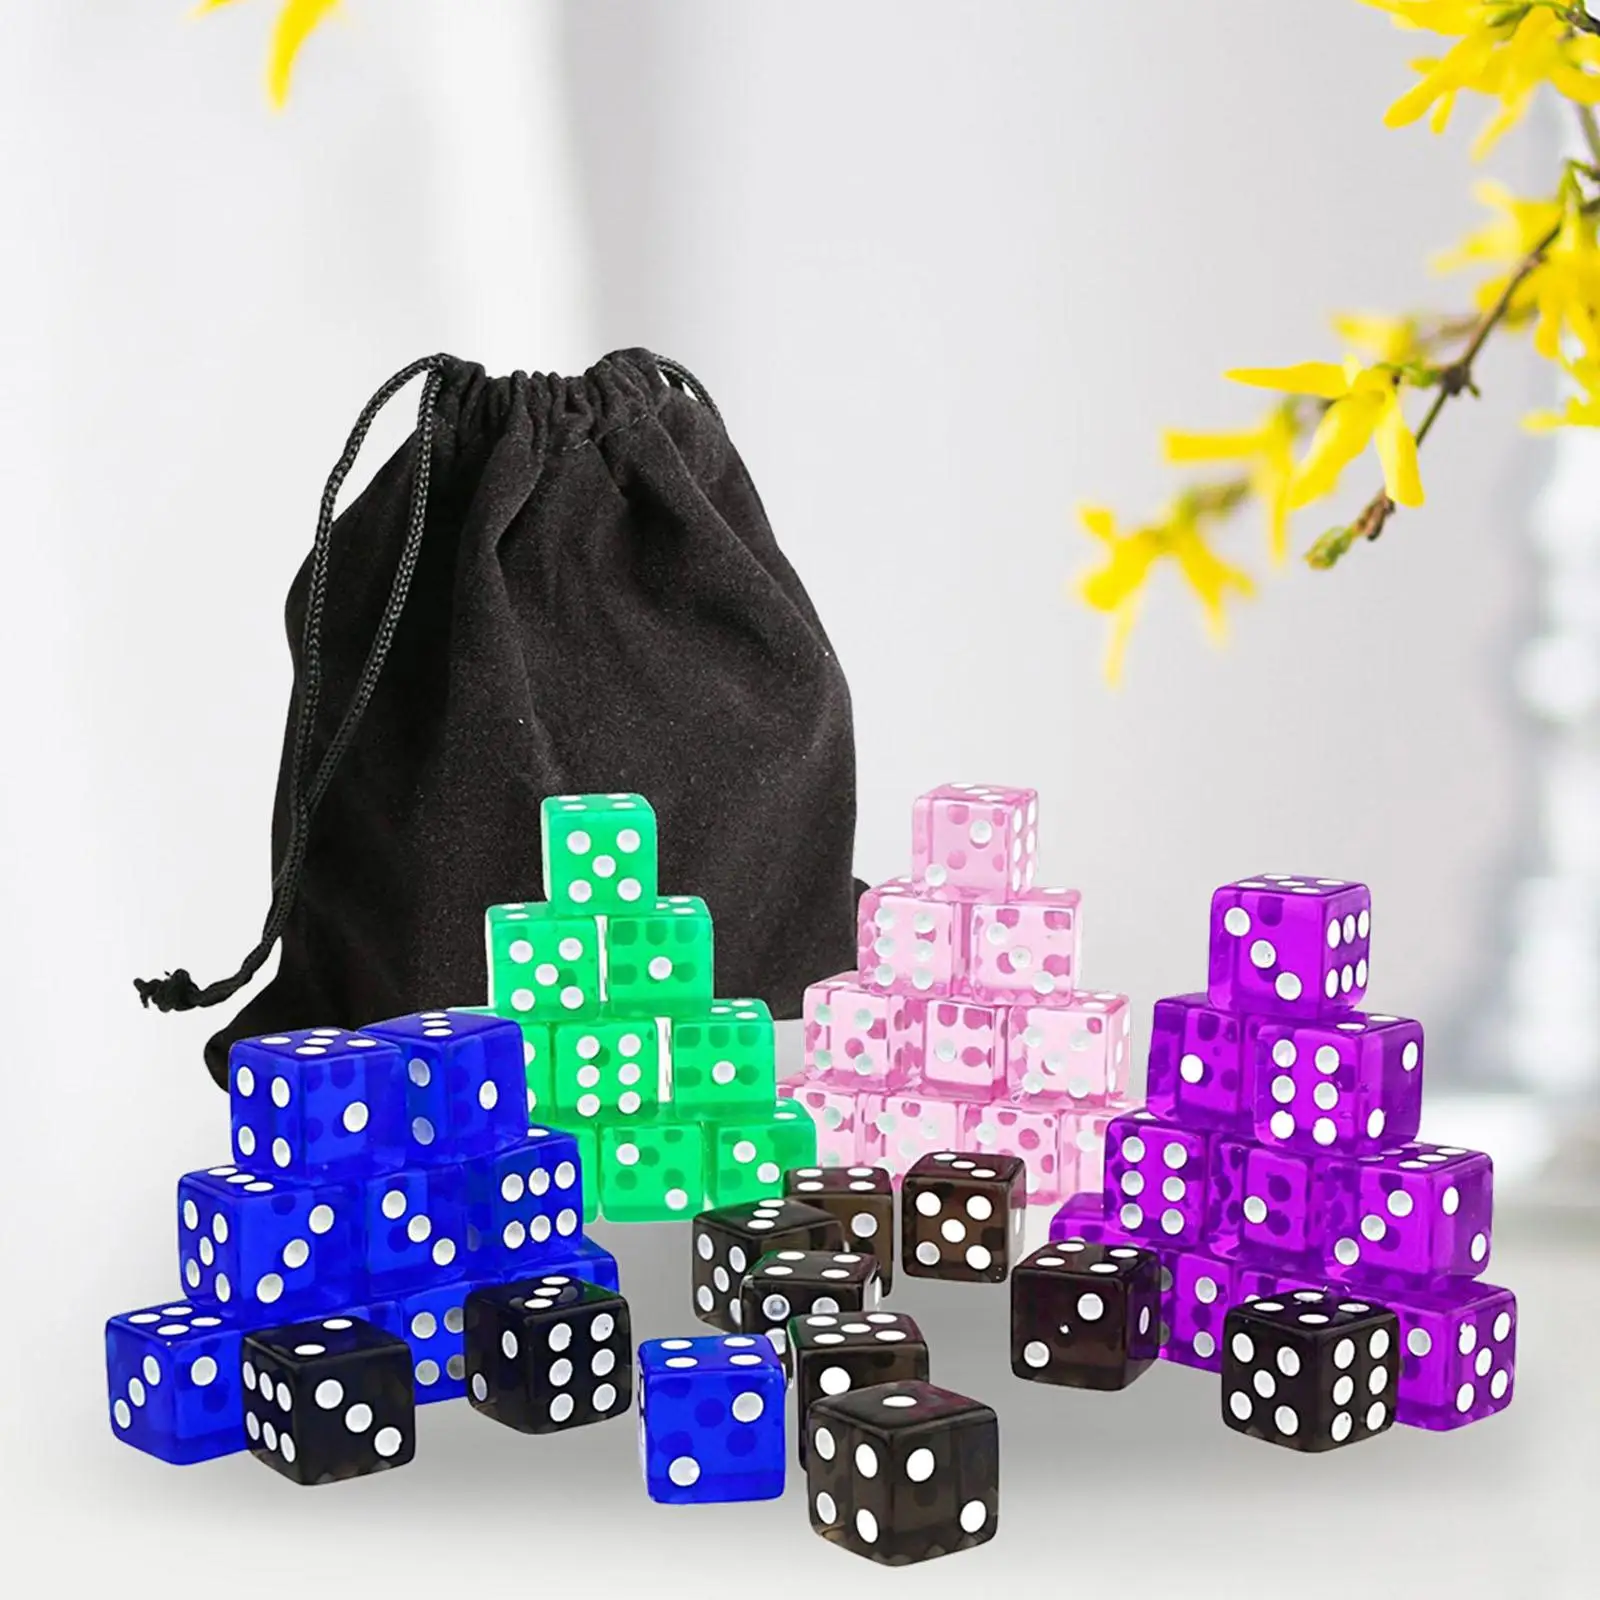 6 Sided Dices, Role Playing Game Dices, Entertainment Toy for Table Game